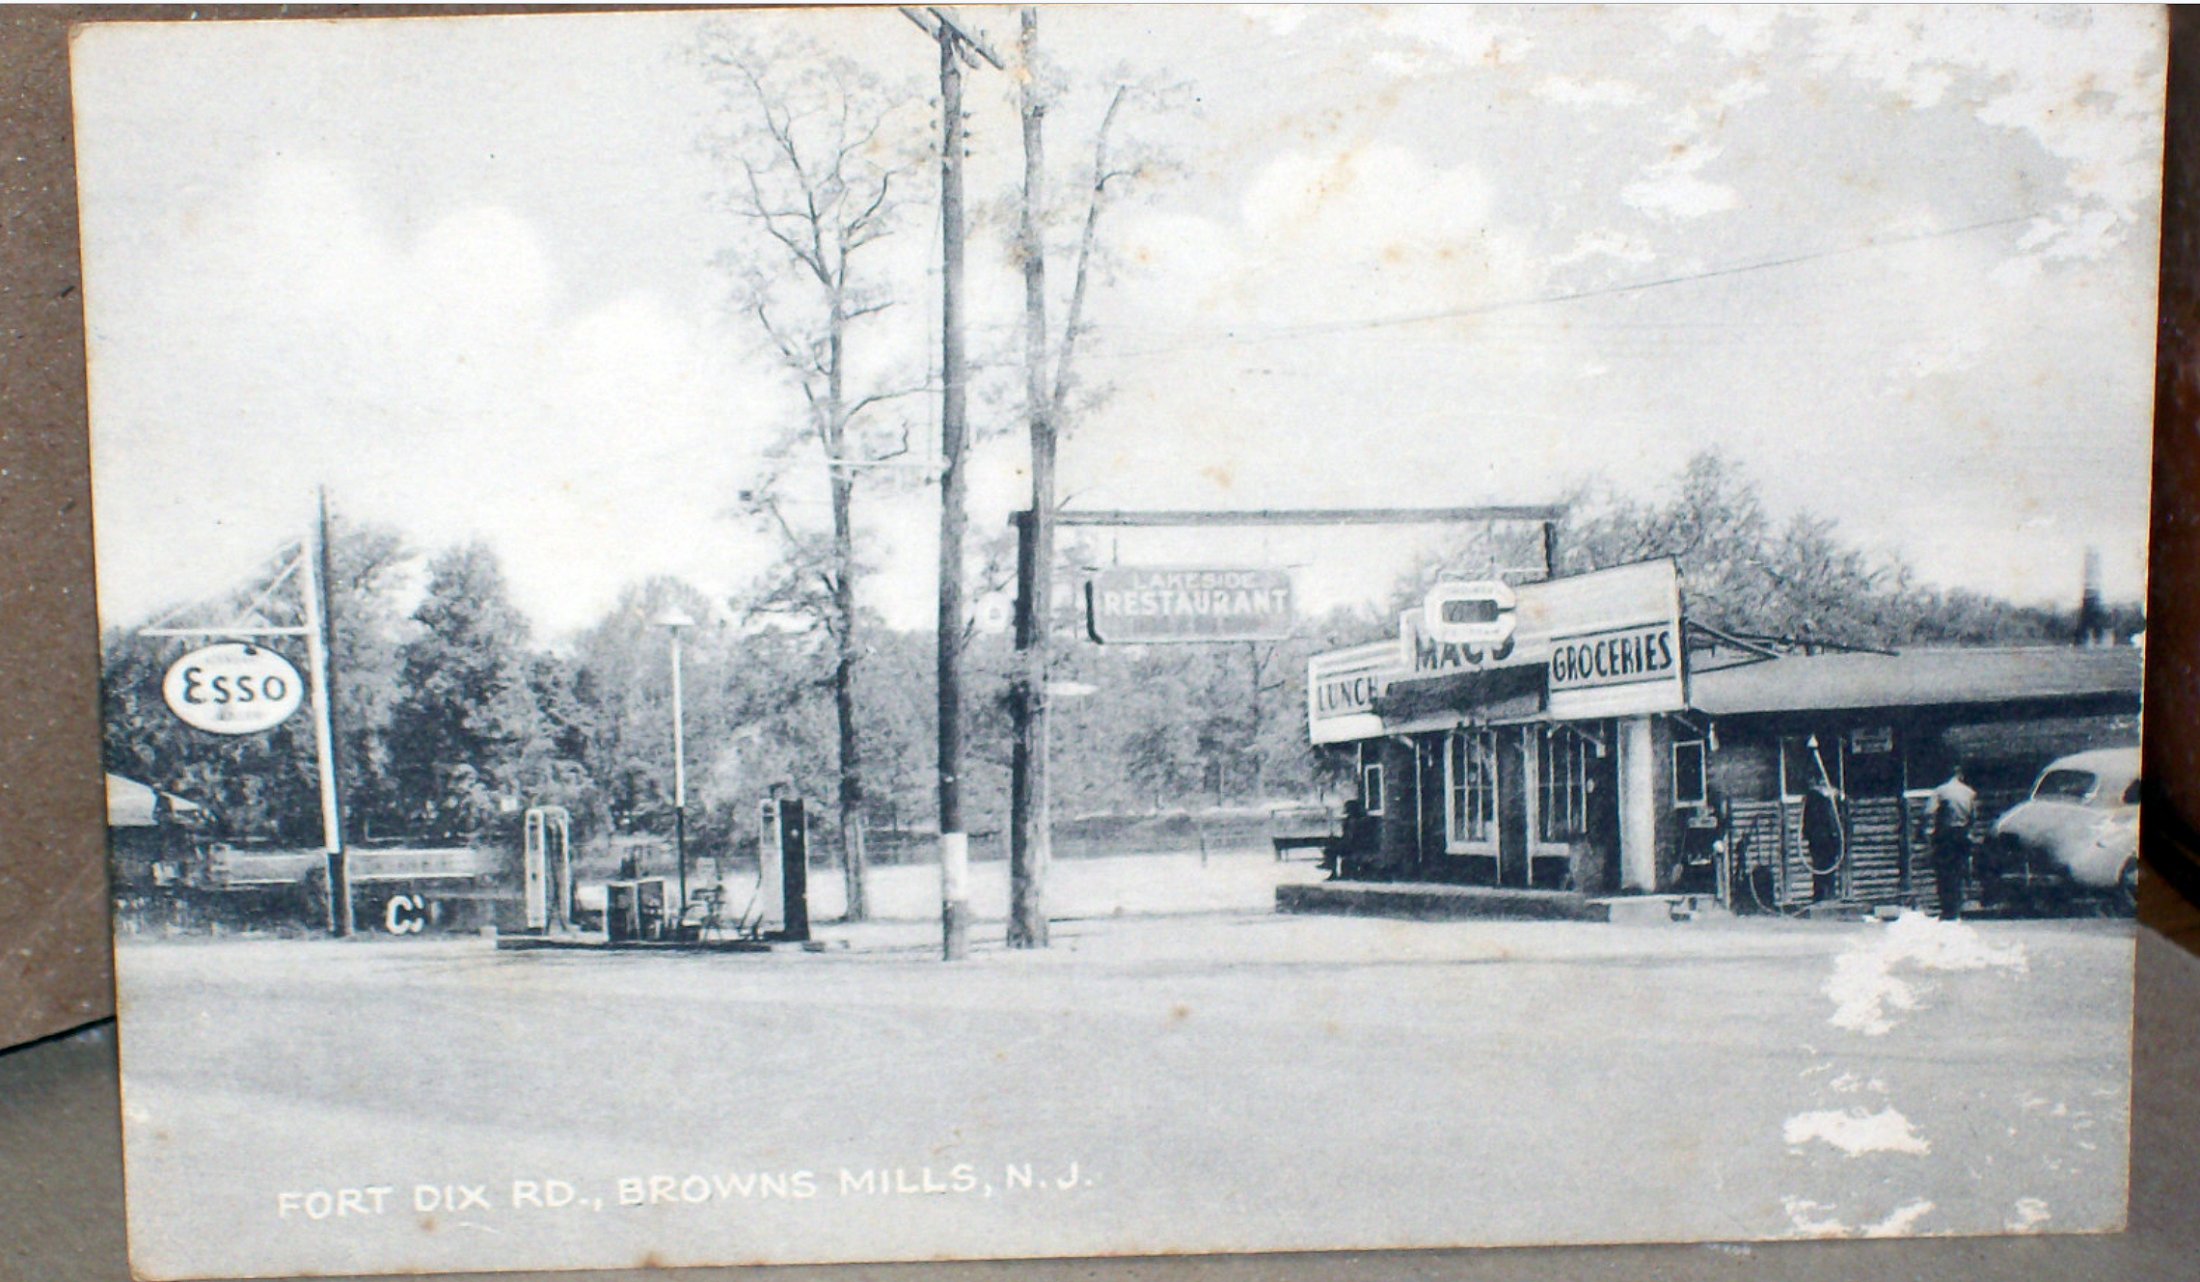 Browns Mills - Esso Station and Macs Groceries - 1931